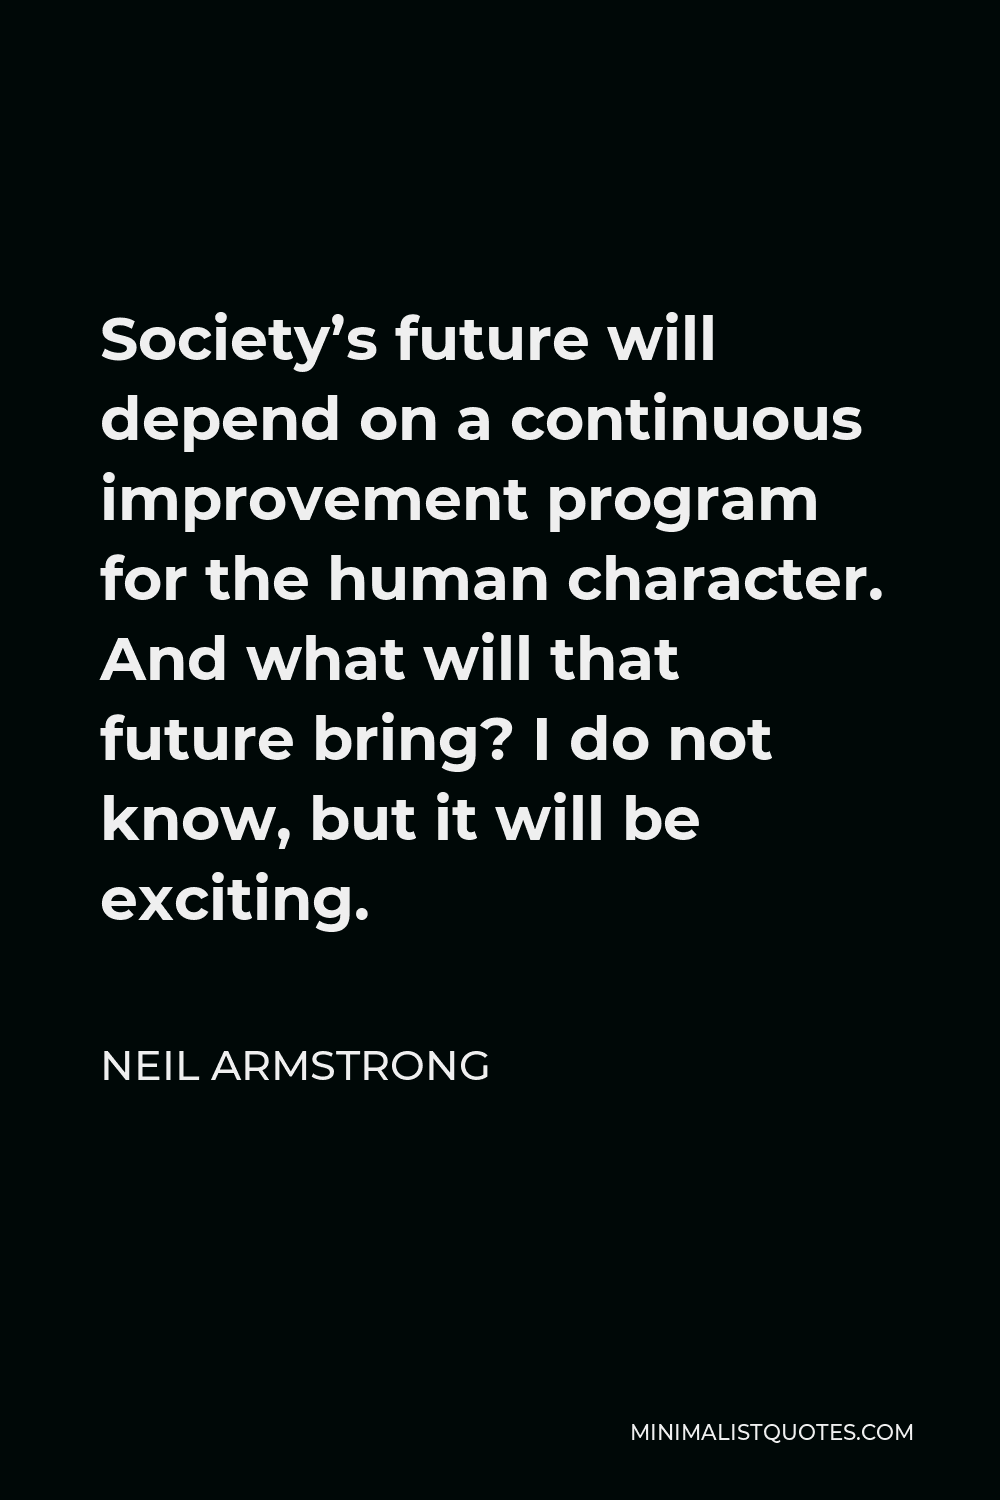 Neil Armstrong Quote - Society’s future will depend on a continuous improvement program for the human character. And what will that future bring? I do not know, but it will be exciting.